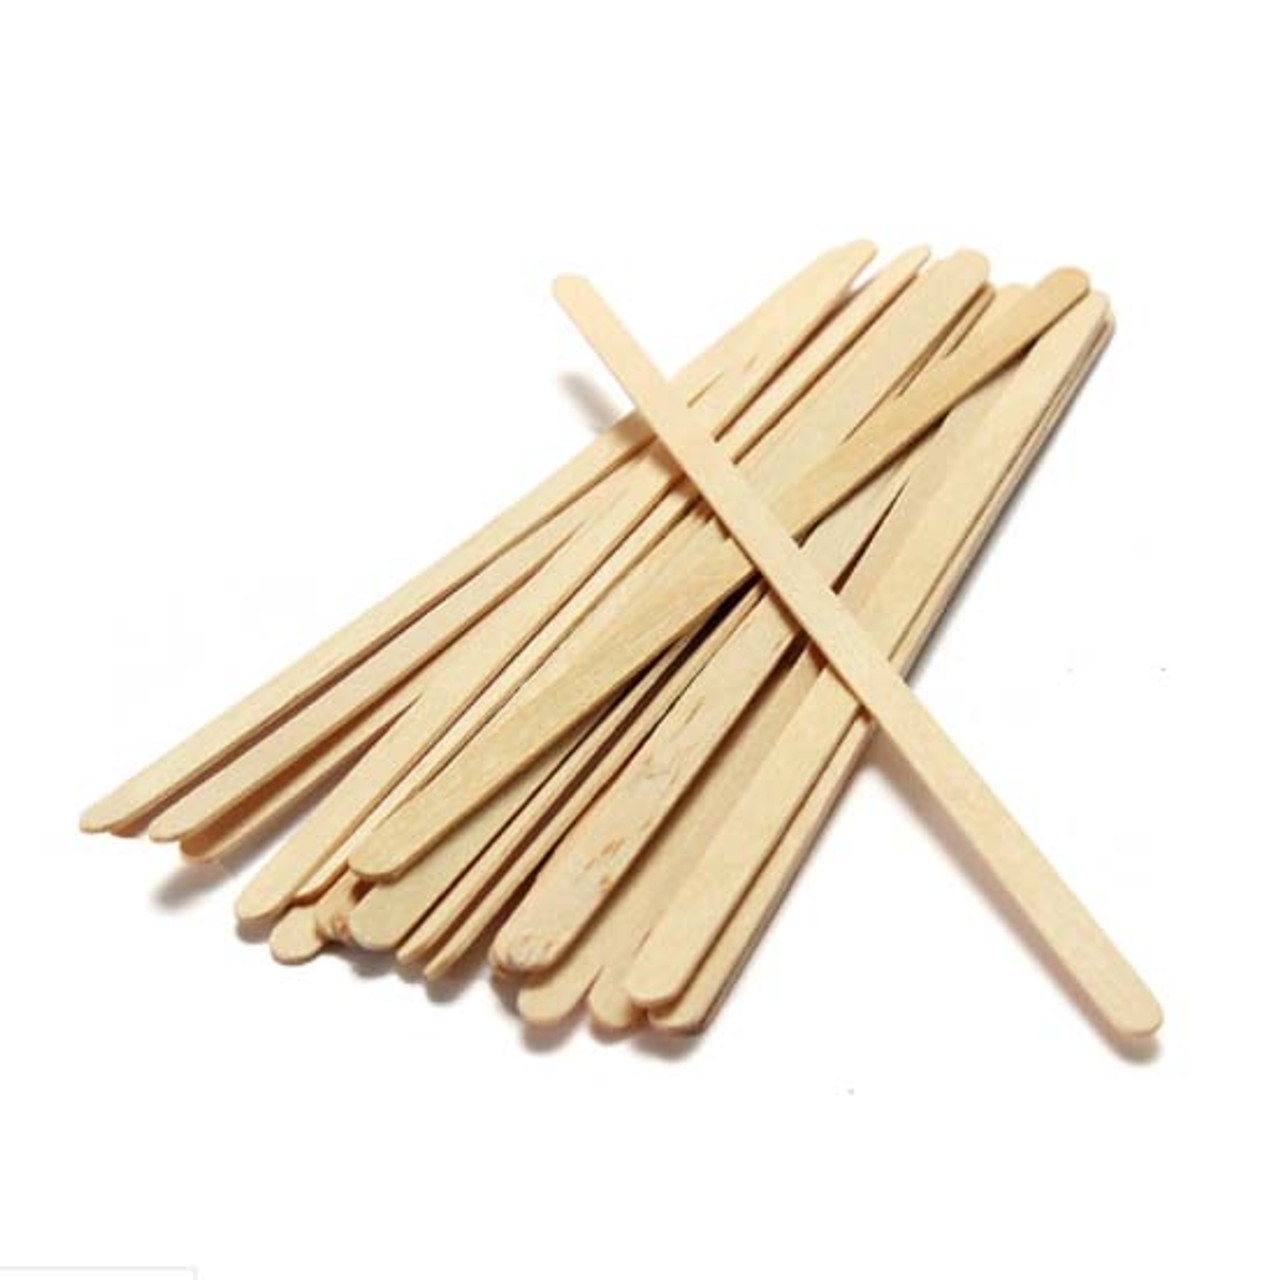 Wooden Coffee Stirrers